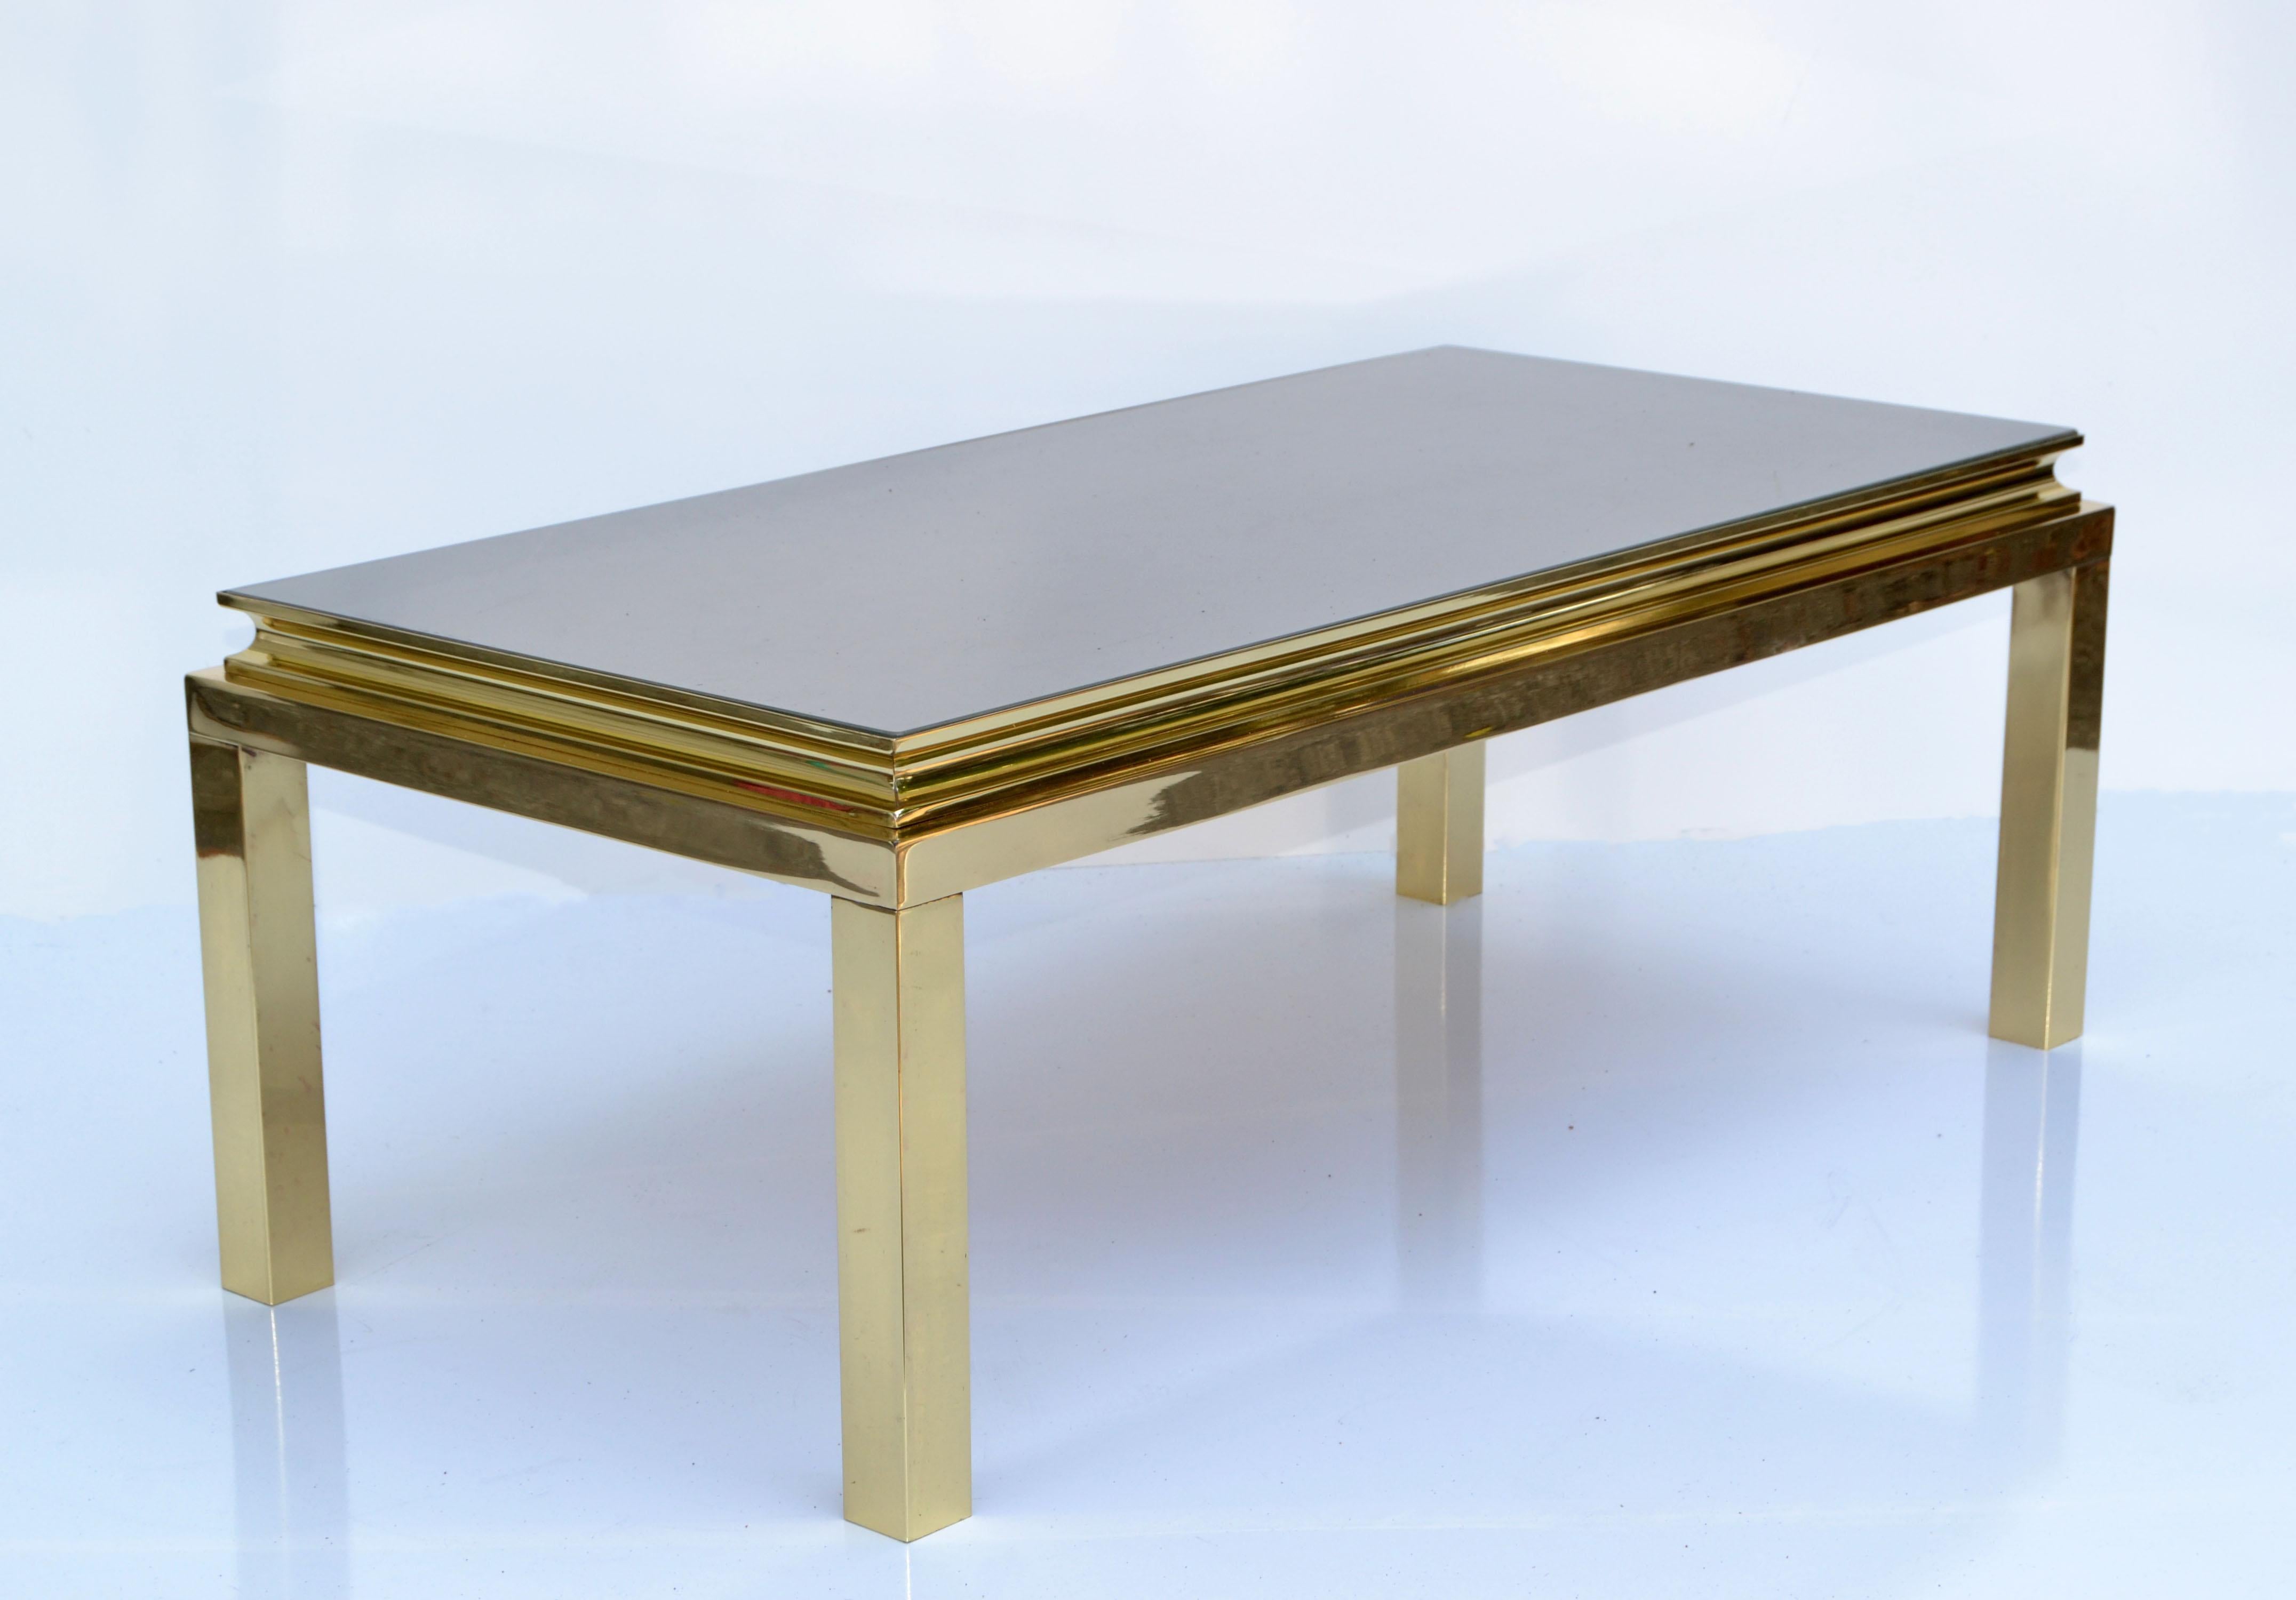 Guy Lefevre for Maison Jansen French 1960 rectangle coffee table featuring a polished brass frame and a vintage gold mirror Glass Top.
Brass is newly polished and the original Mirror Glass has some scratches due to History.
Mirrored Glass